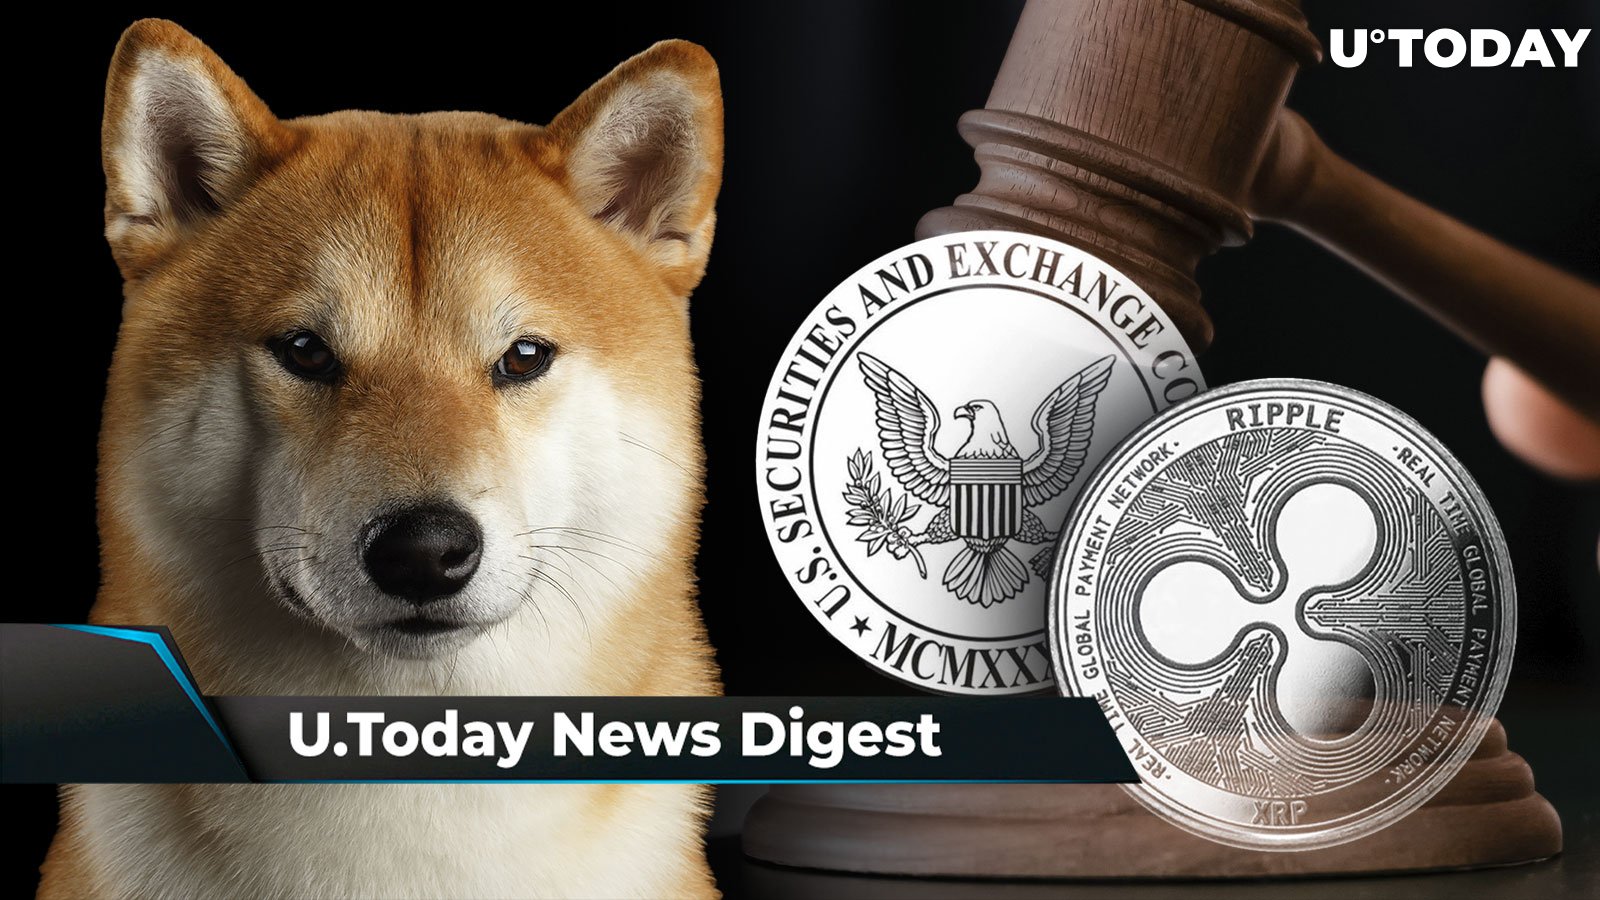 Shytoshi Kusama Issues Major Warning on Shibarium, Top Lawyer Reacts to Ripple CEO's Prediction on When XRP Case Ends: Crypto News Digest by U.Today